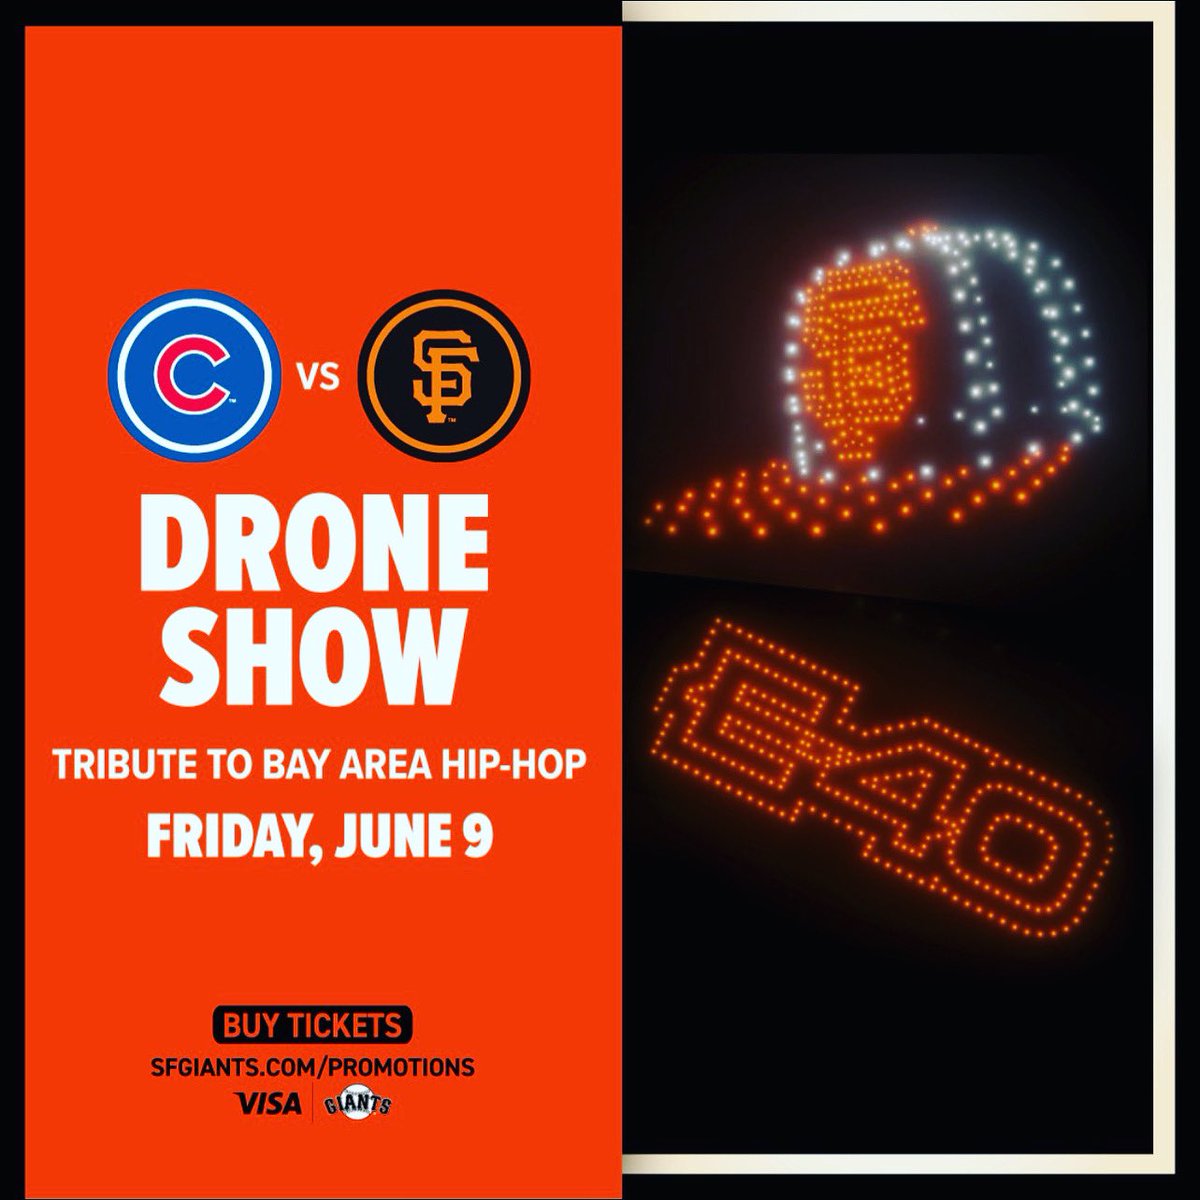 Tonight celebrating 50 years of hip hop Yay Area edition. @SFGiants first ever drone show tonight after the game.